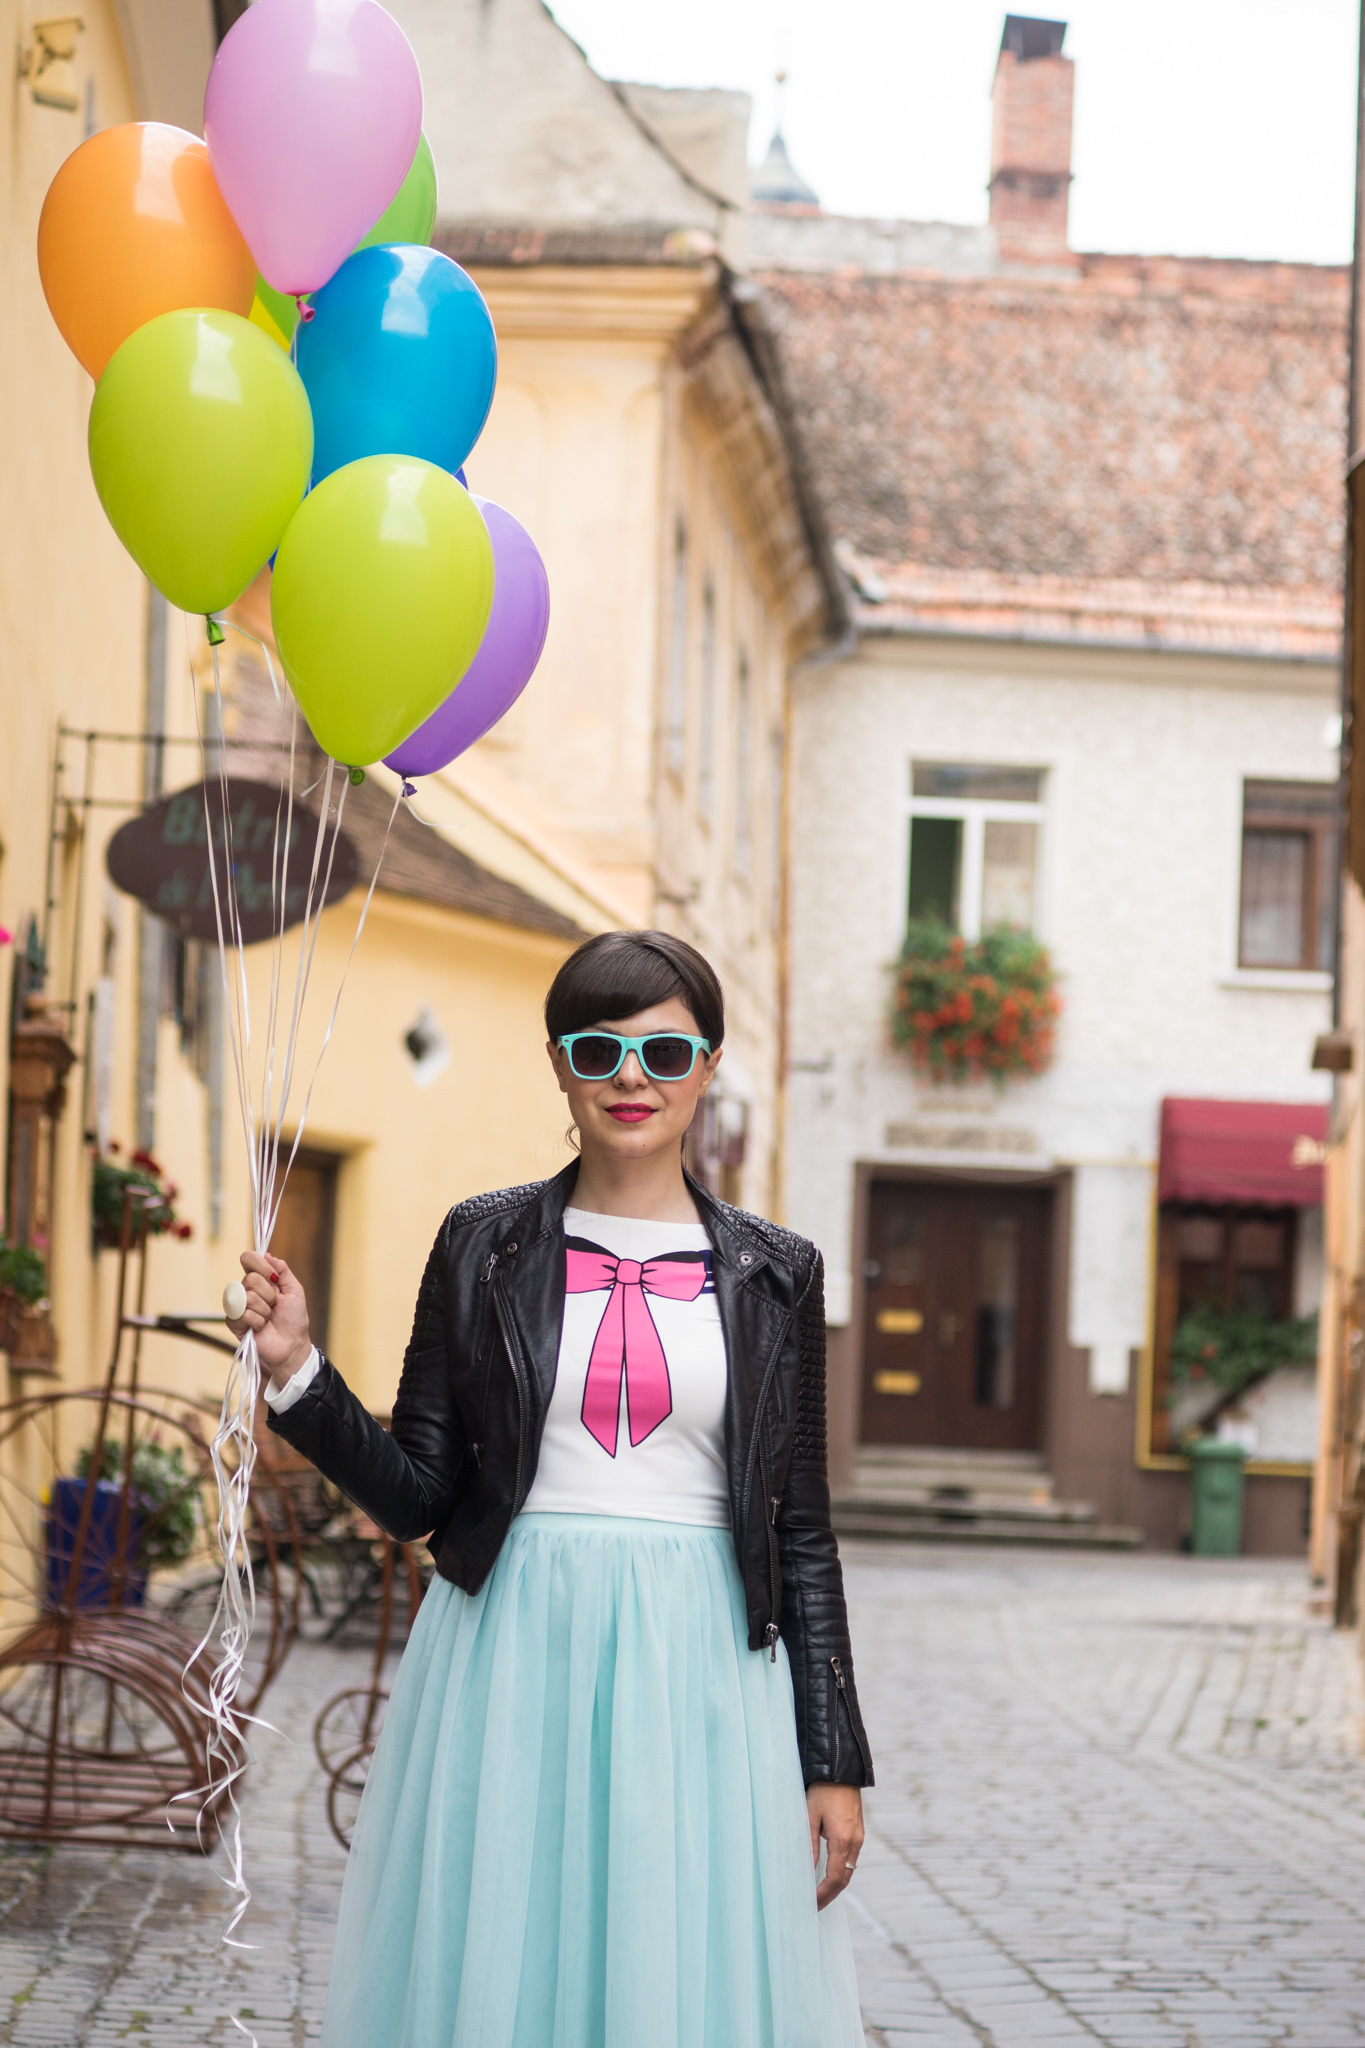 special 30th birthday photo shoot - tutu, bows and colorful balloons koton mint tulle skirt mint sneakers h&m crop top pink bow new yorker leather jacket rockish vibes rock brasov transfagarasan romania 